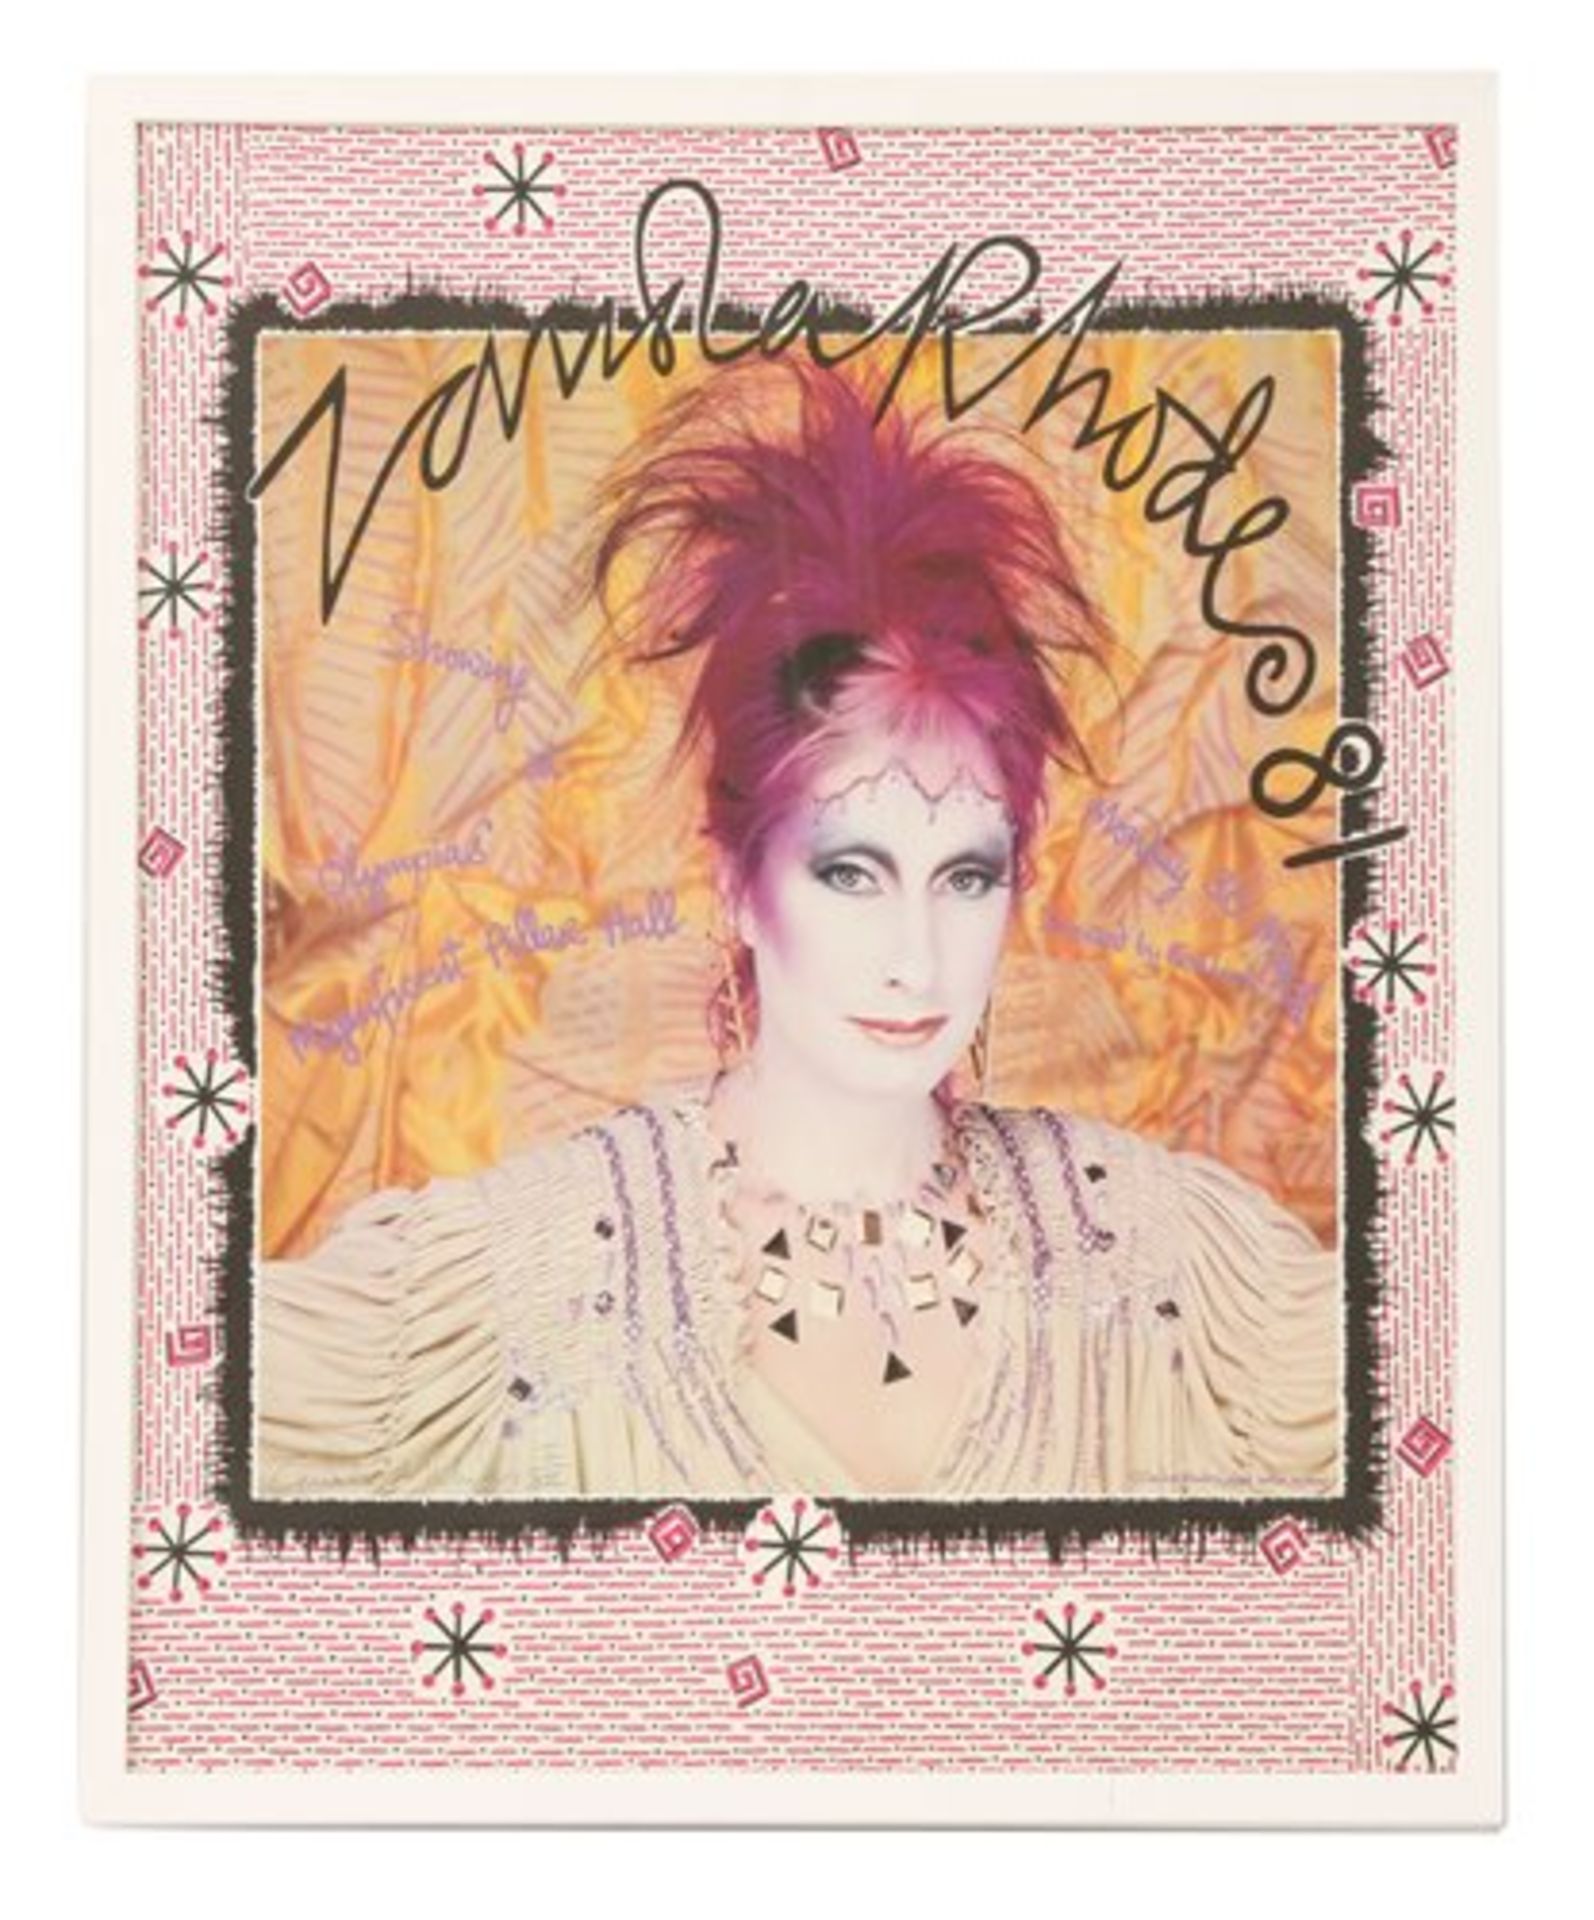 Zandra Rhodes collection posters: - Image 2 of 2